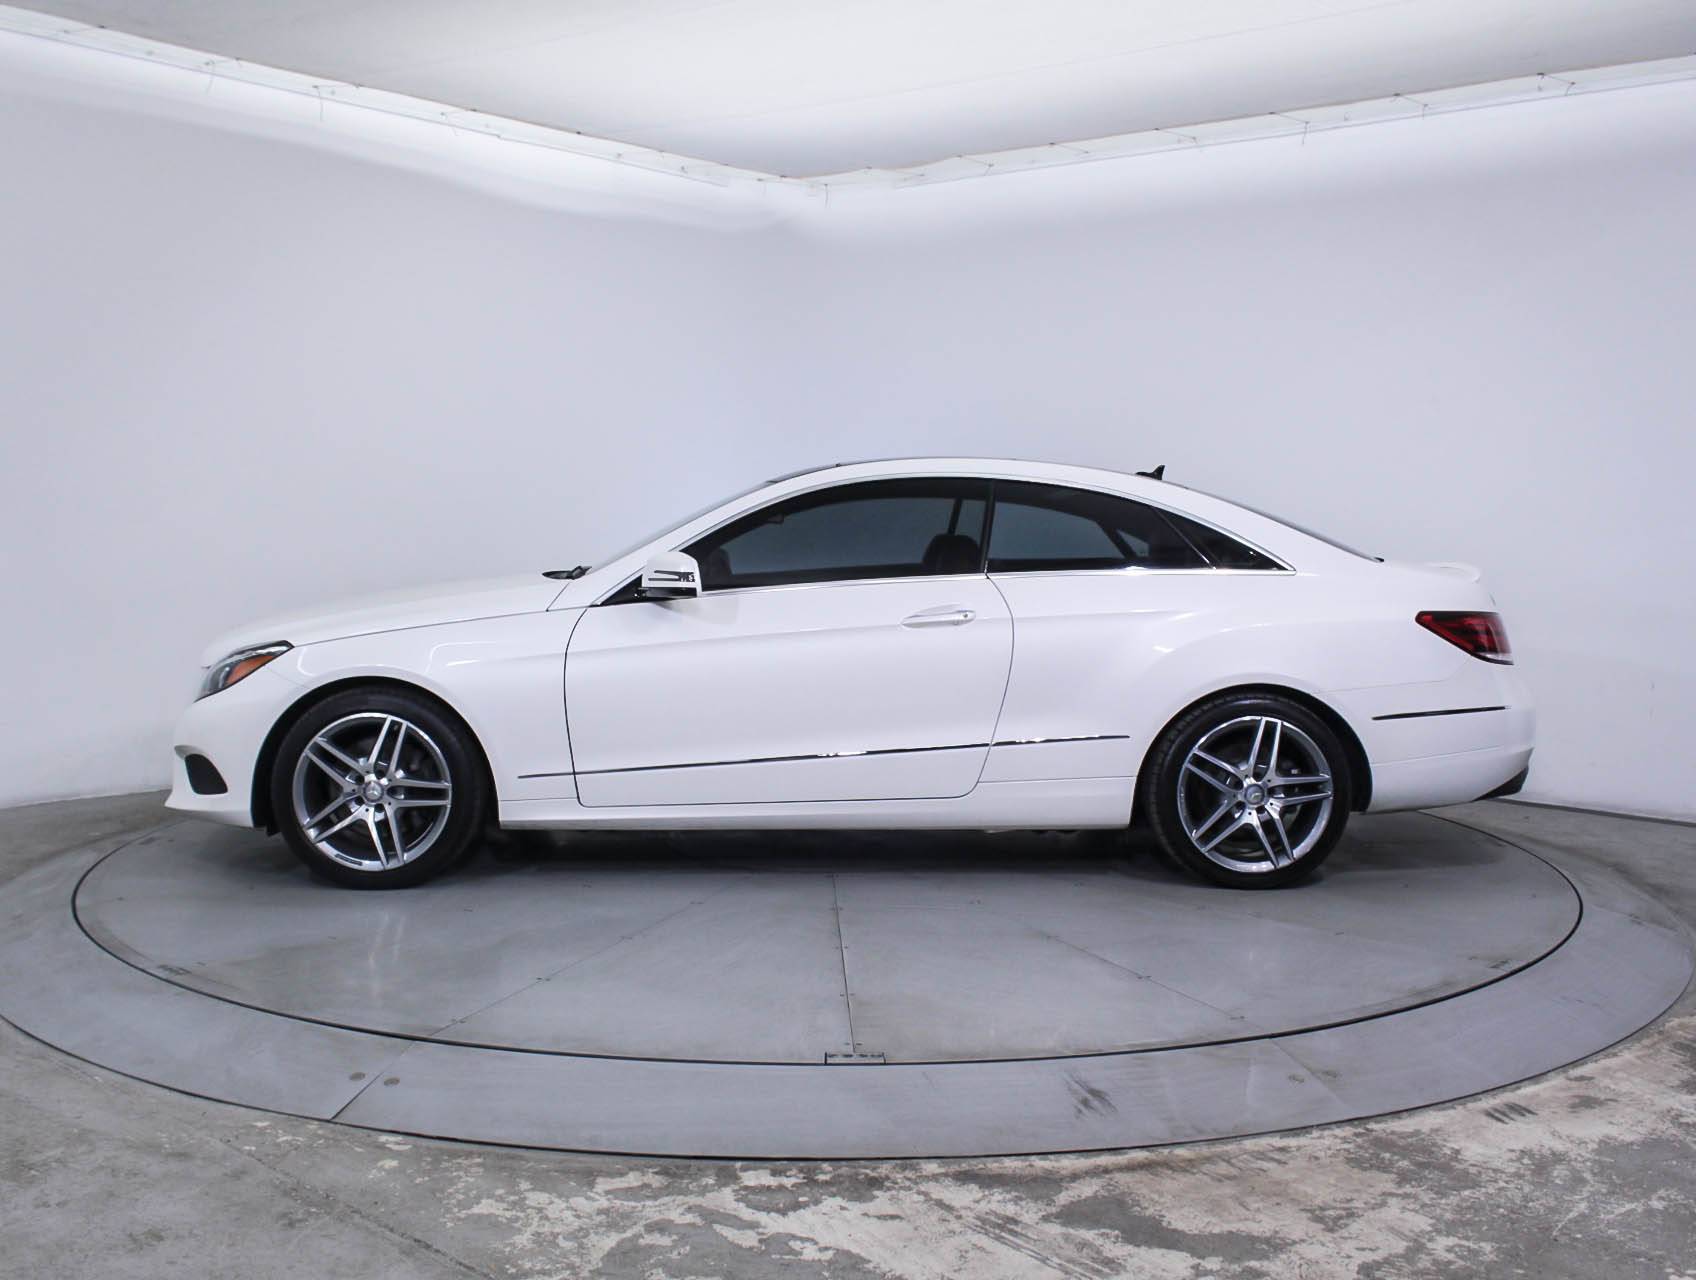 Used 14 Mercedes Benz E Class 50 Coupe For Sale In Hollywood Fl 298 Florida Fine Cars